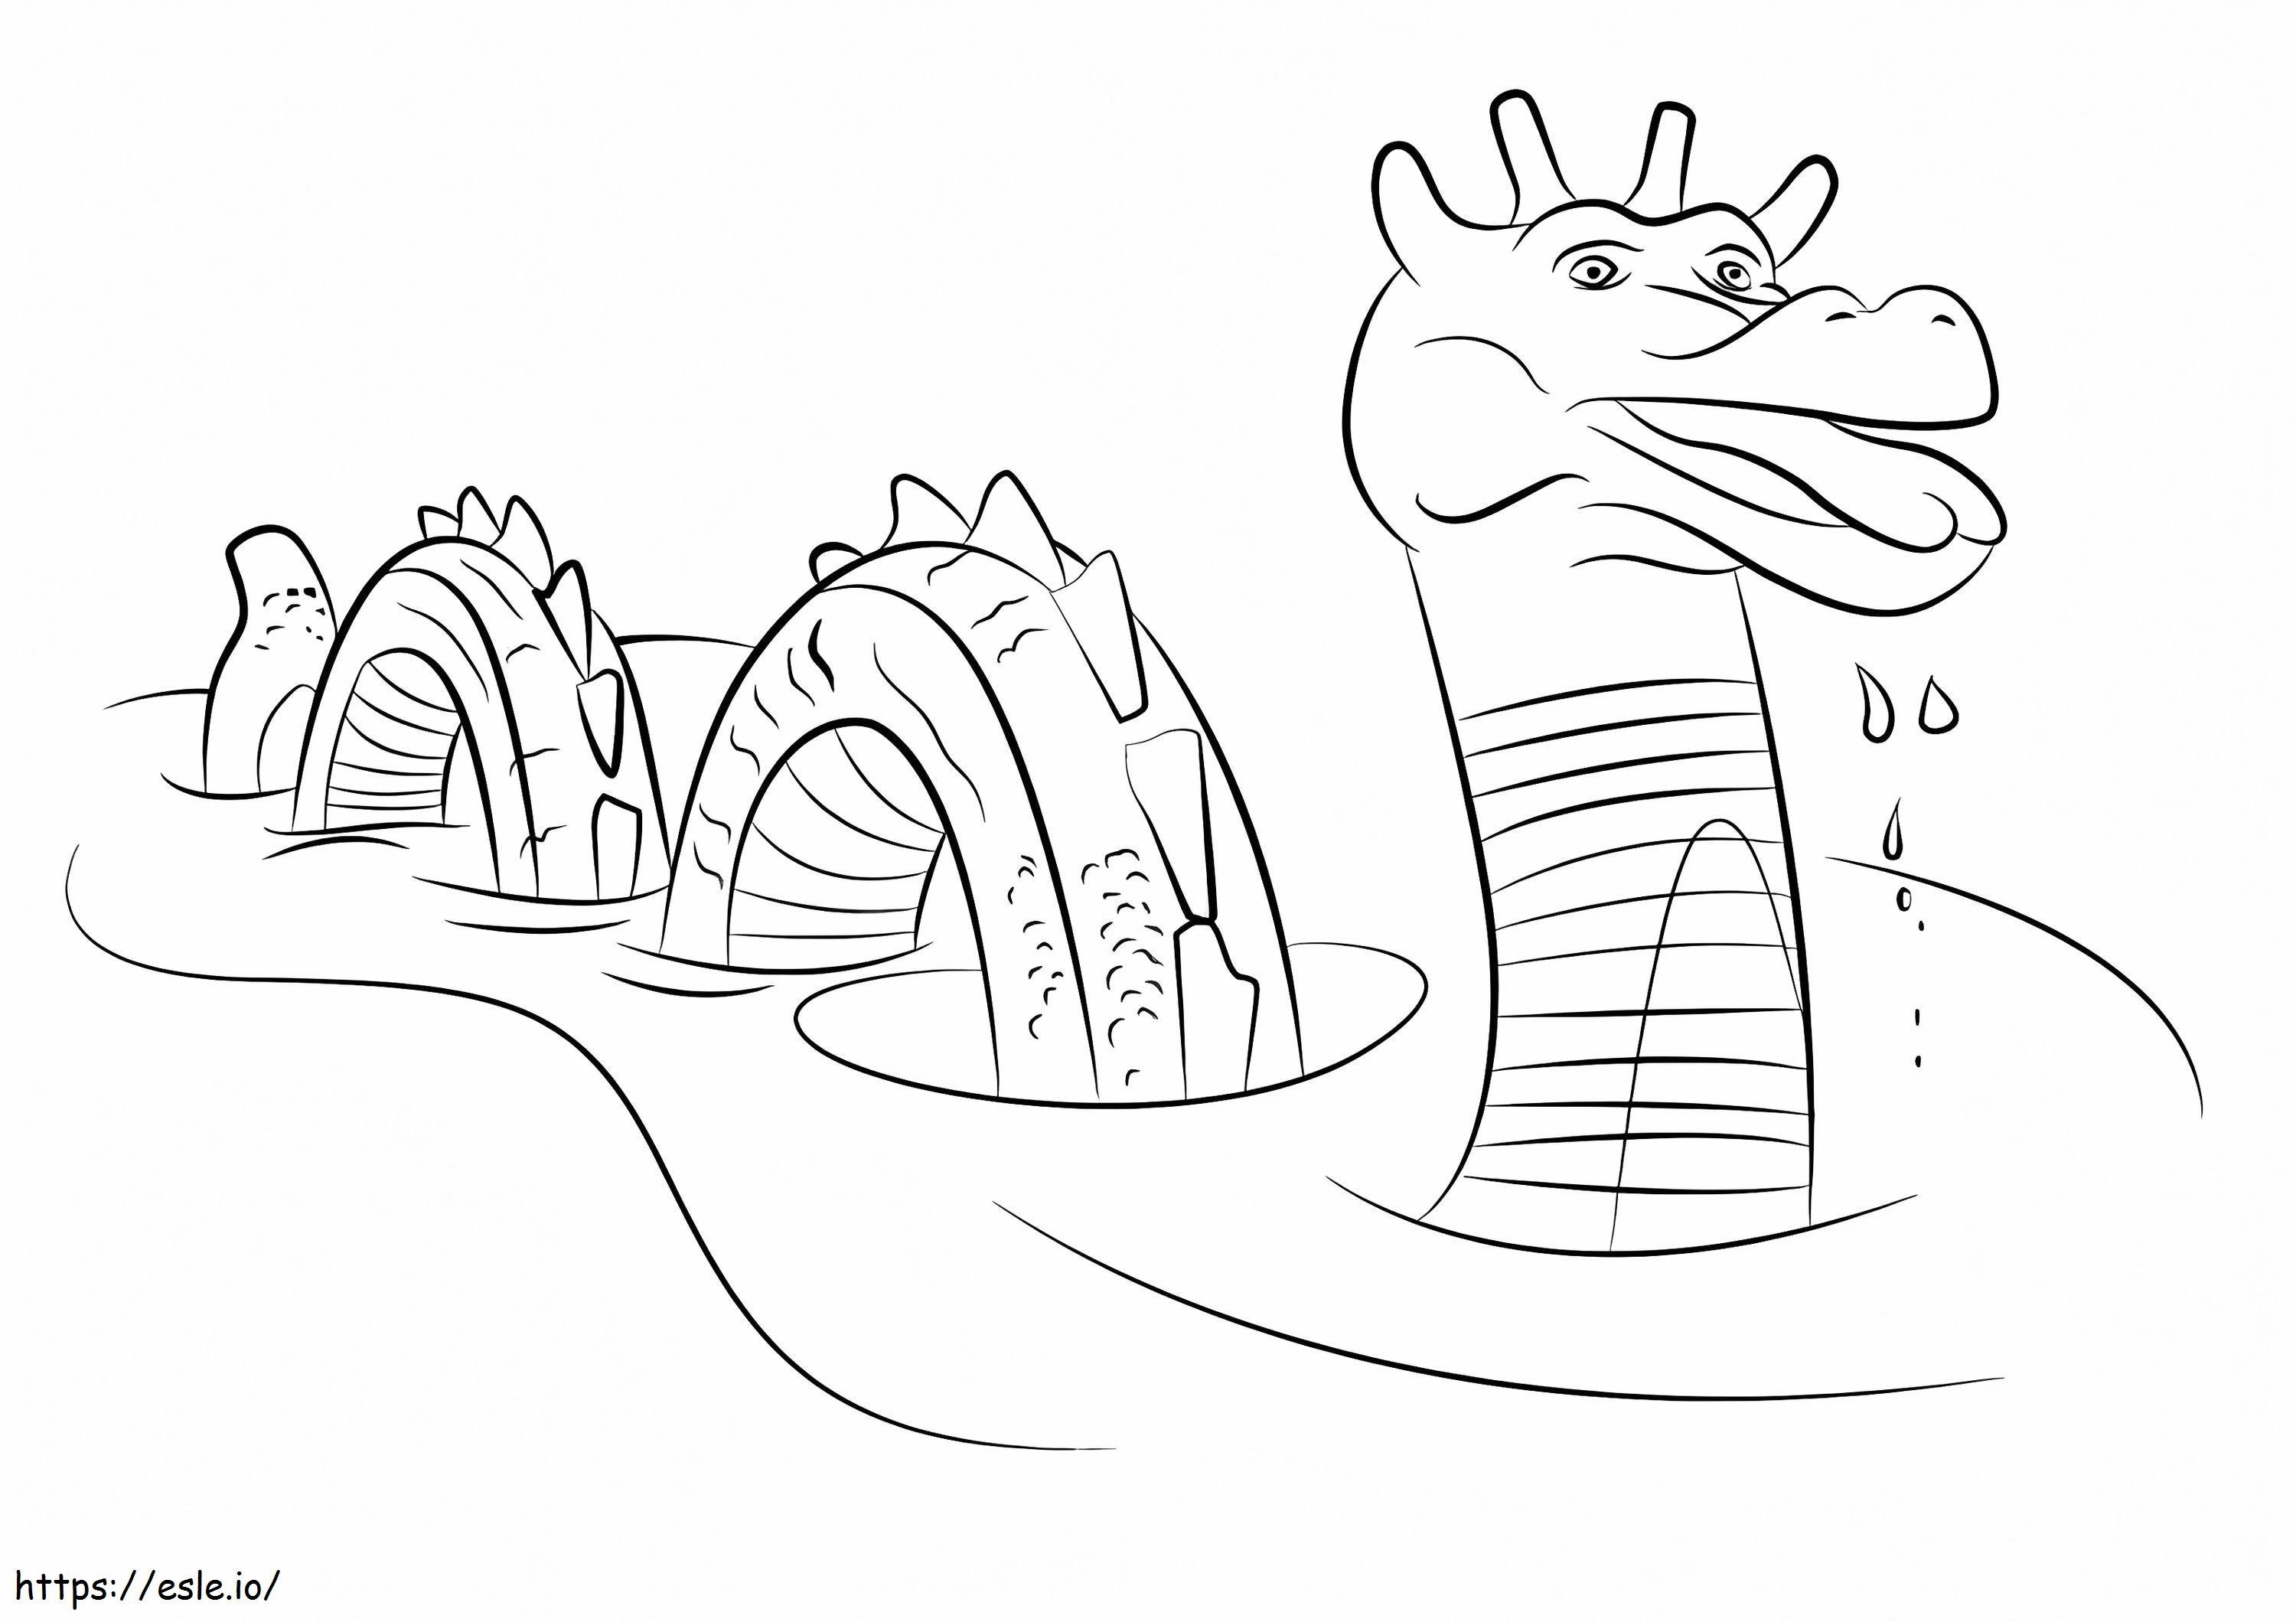 Canada Ogopogo coloring page